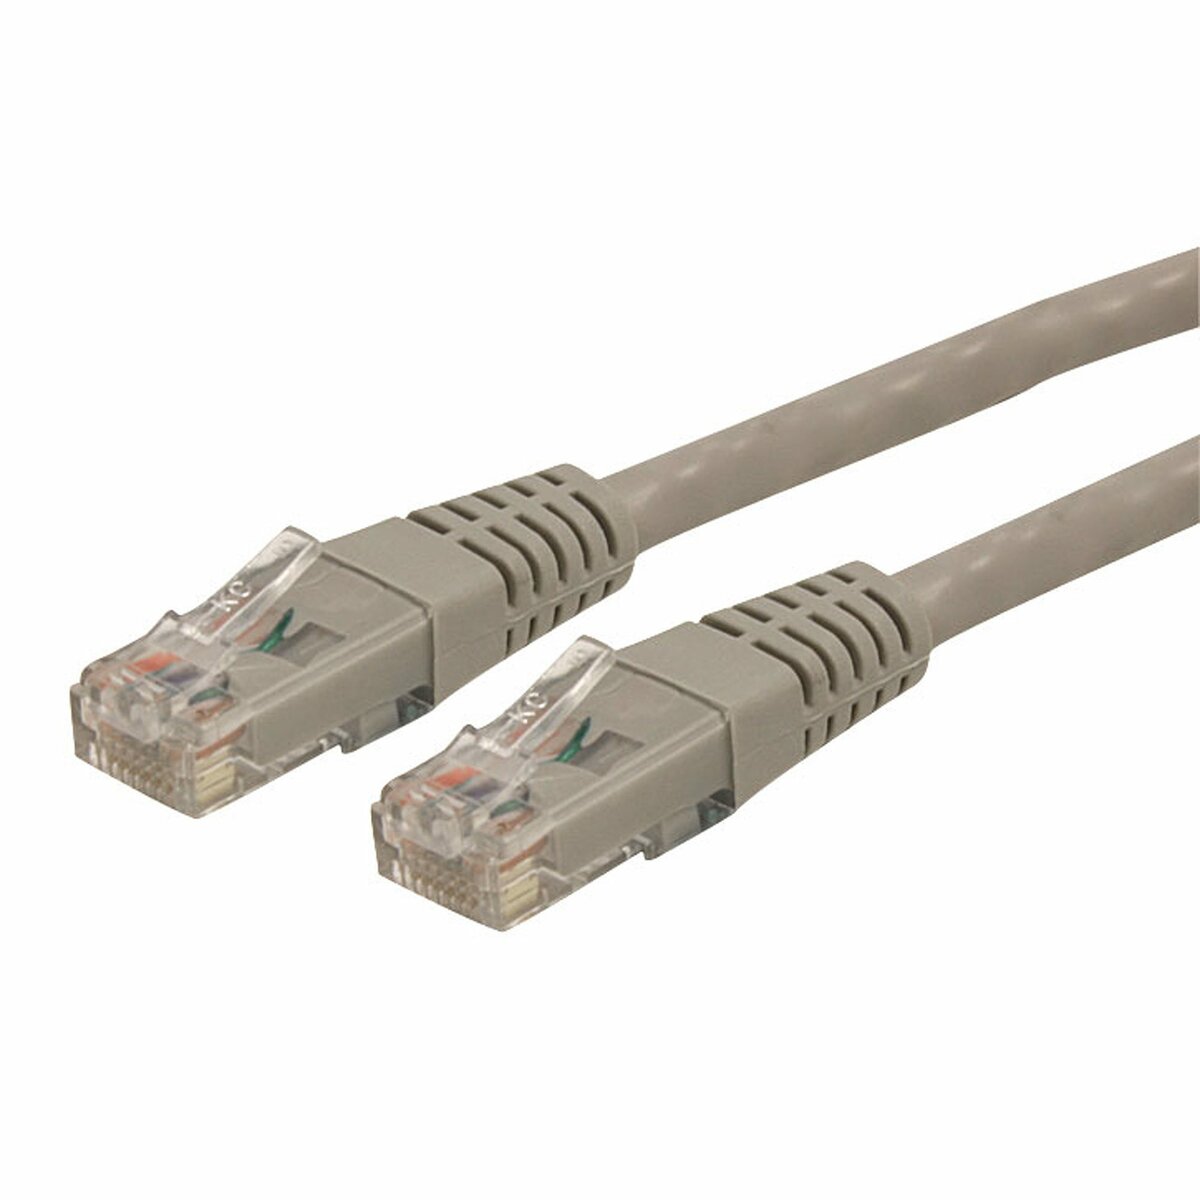 StarTech.com 1ft CAT6 Ethernet Cable - 10 Gigabit Molded RJ45 650MHz 100W  PoE Patch Cord - CAT 6 10GbE UTP Network Cable with Strain Relief - Blue -  Fluke Tested/Wiring is UL